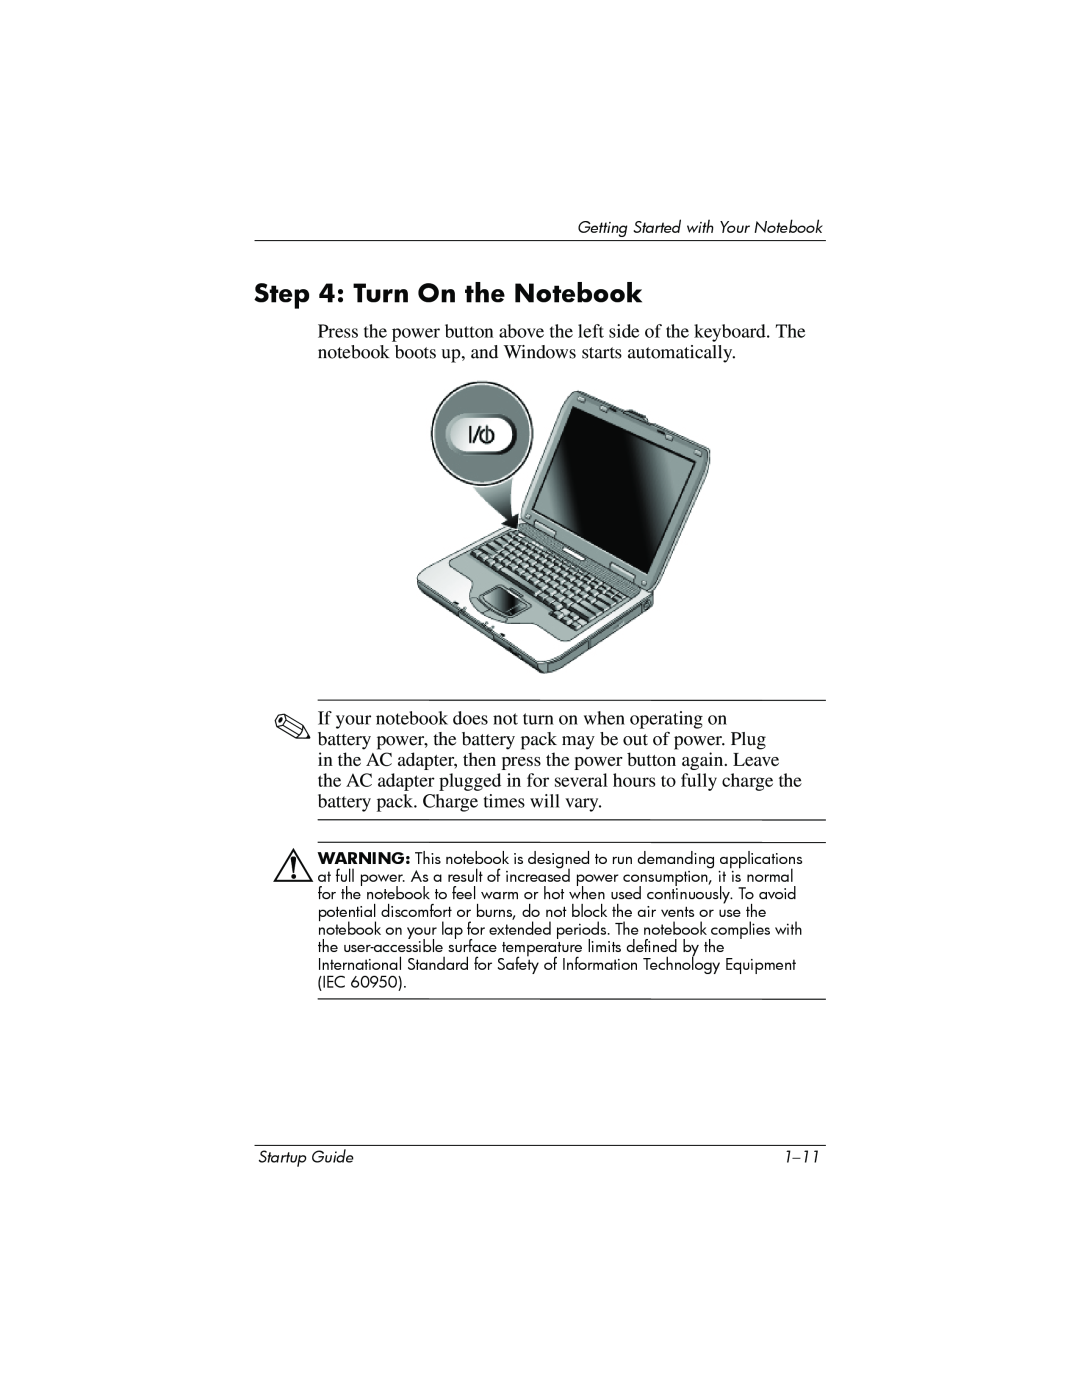 Compaq Personal Computer manual Turn On the Notebook 